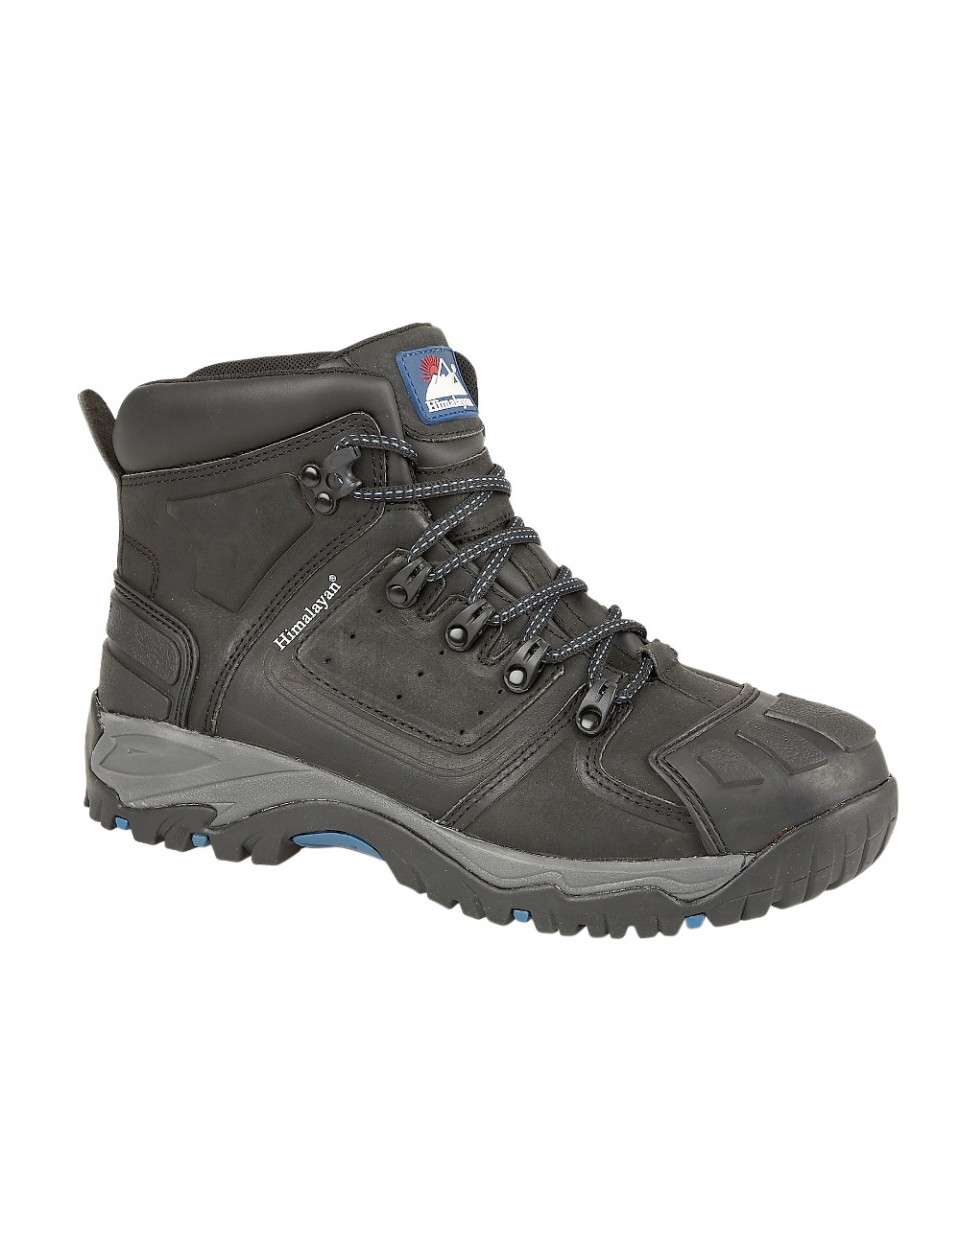 himalayan safety shoes